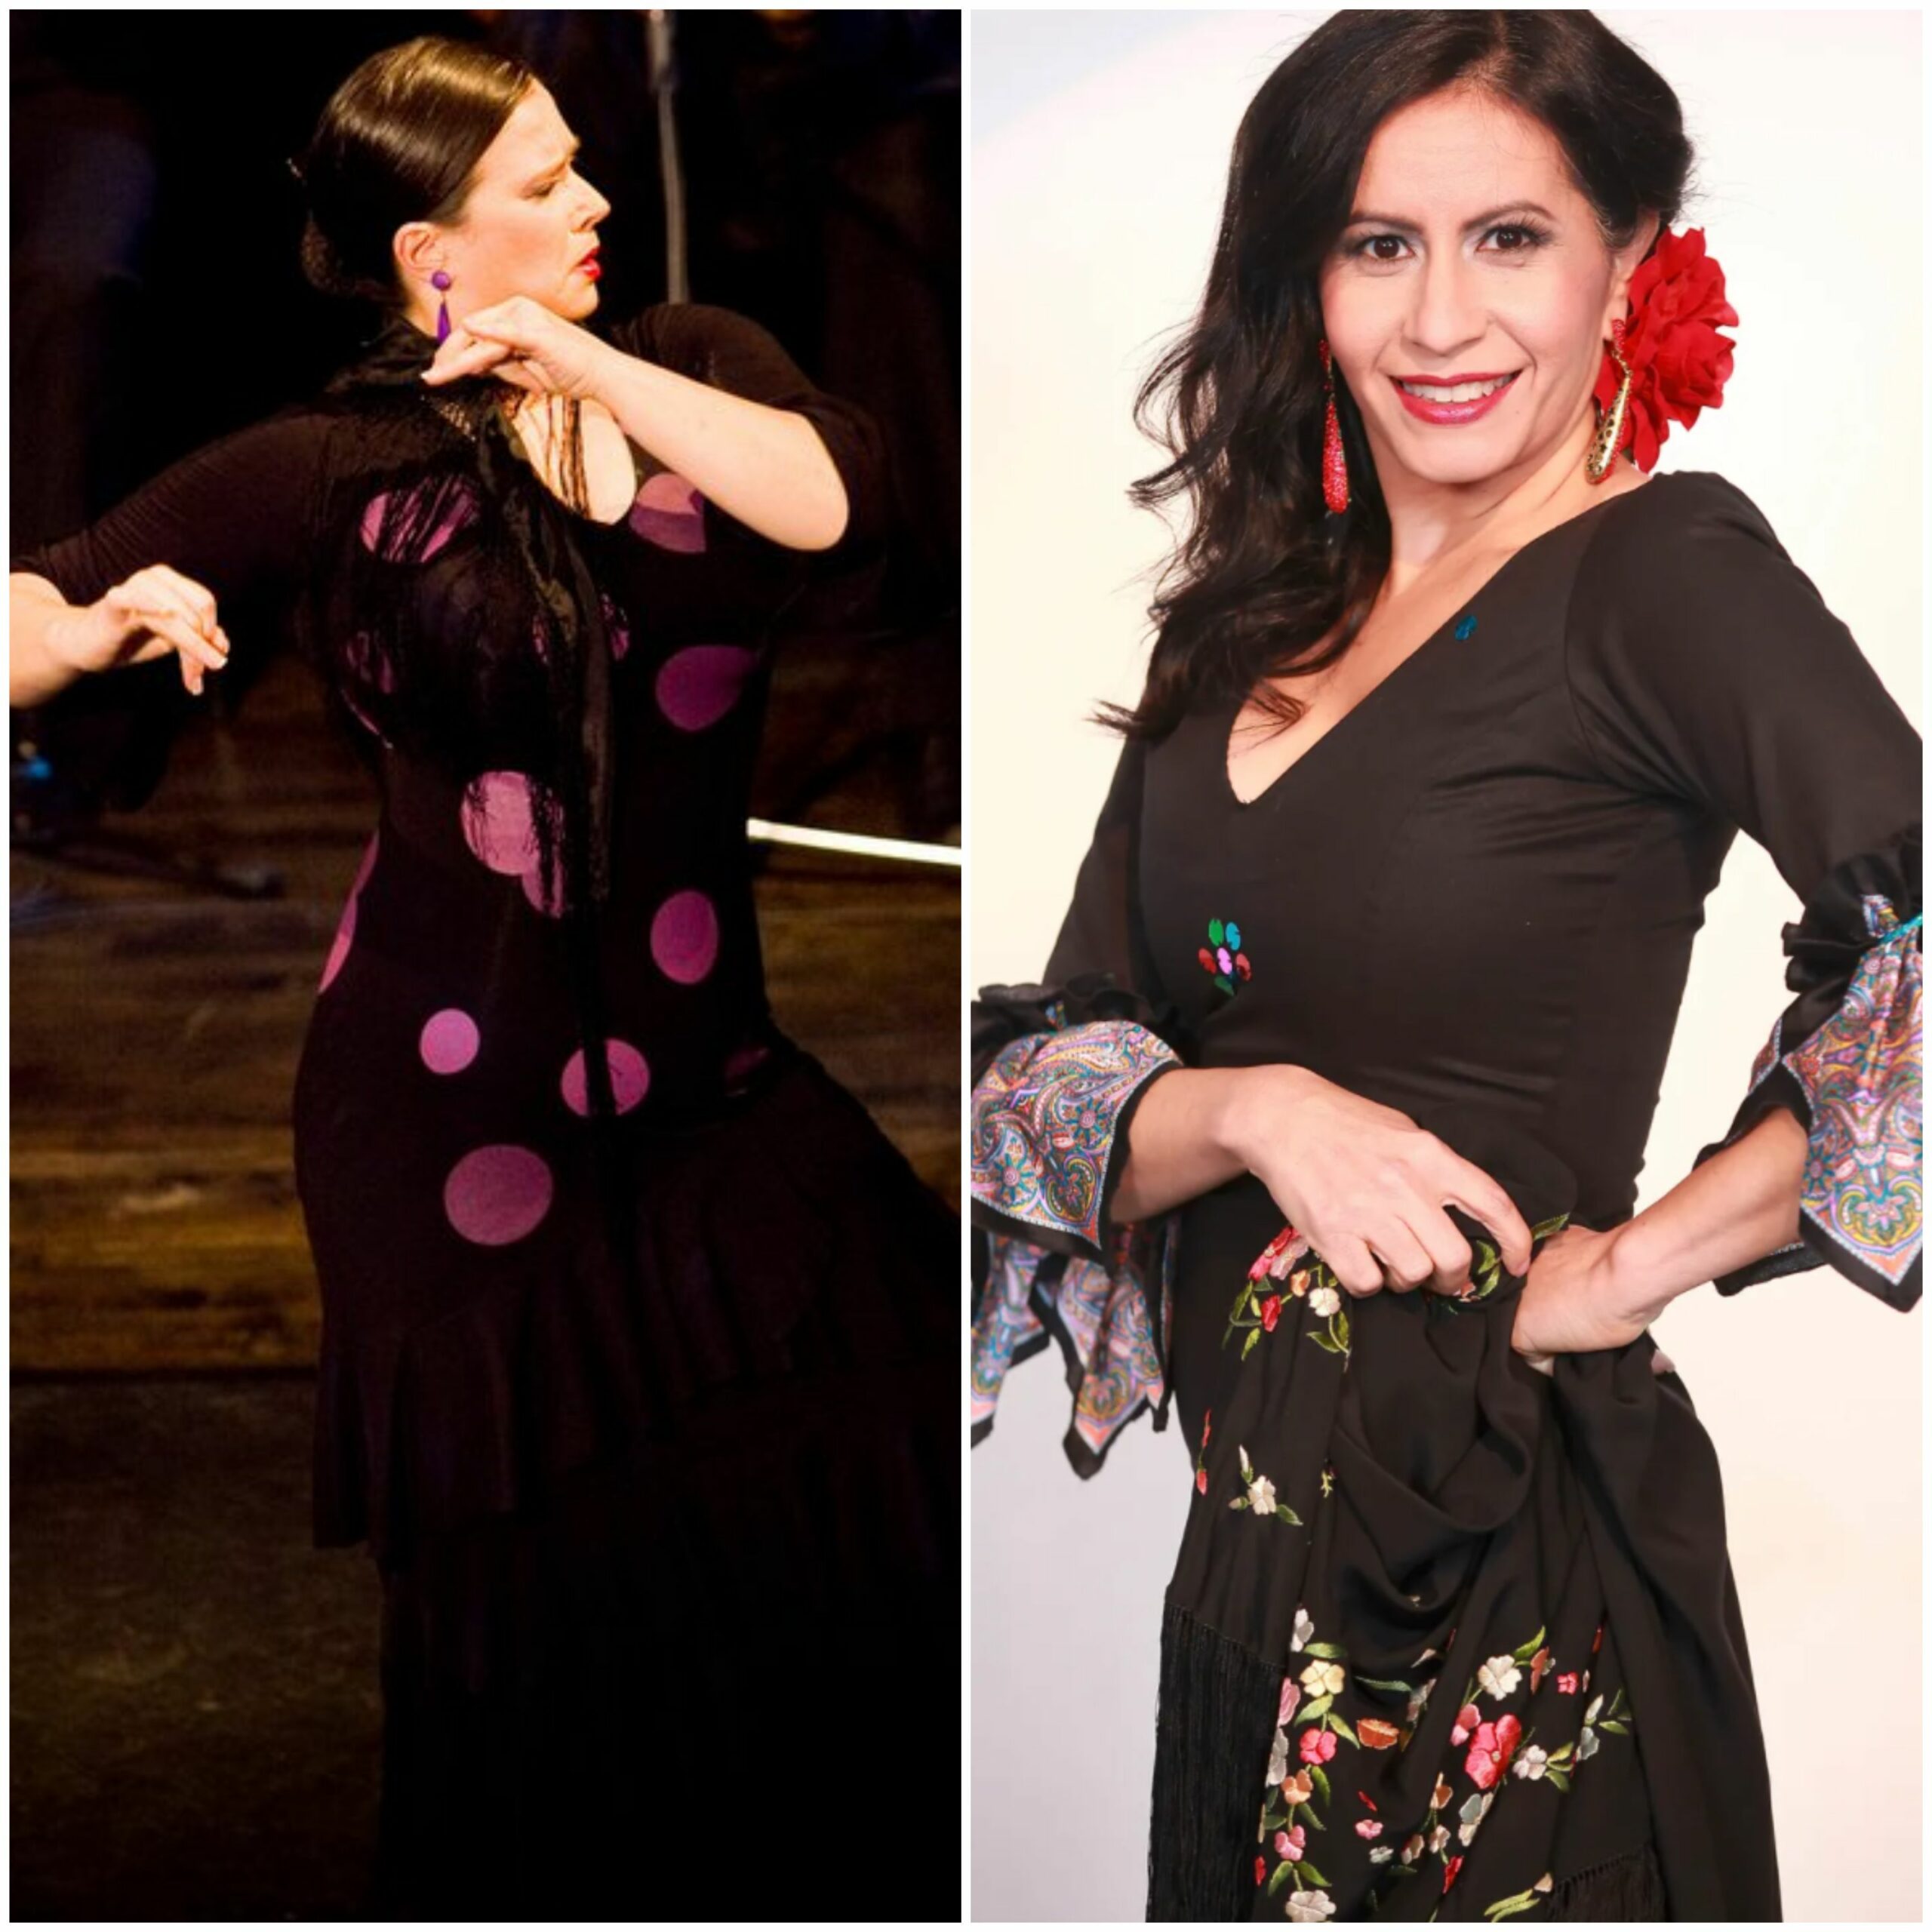 Bonnie Stewart (left) and Jafelin Helten (right) in flamenco dance poses